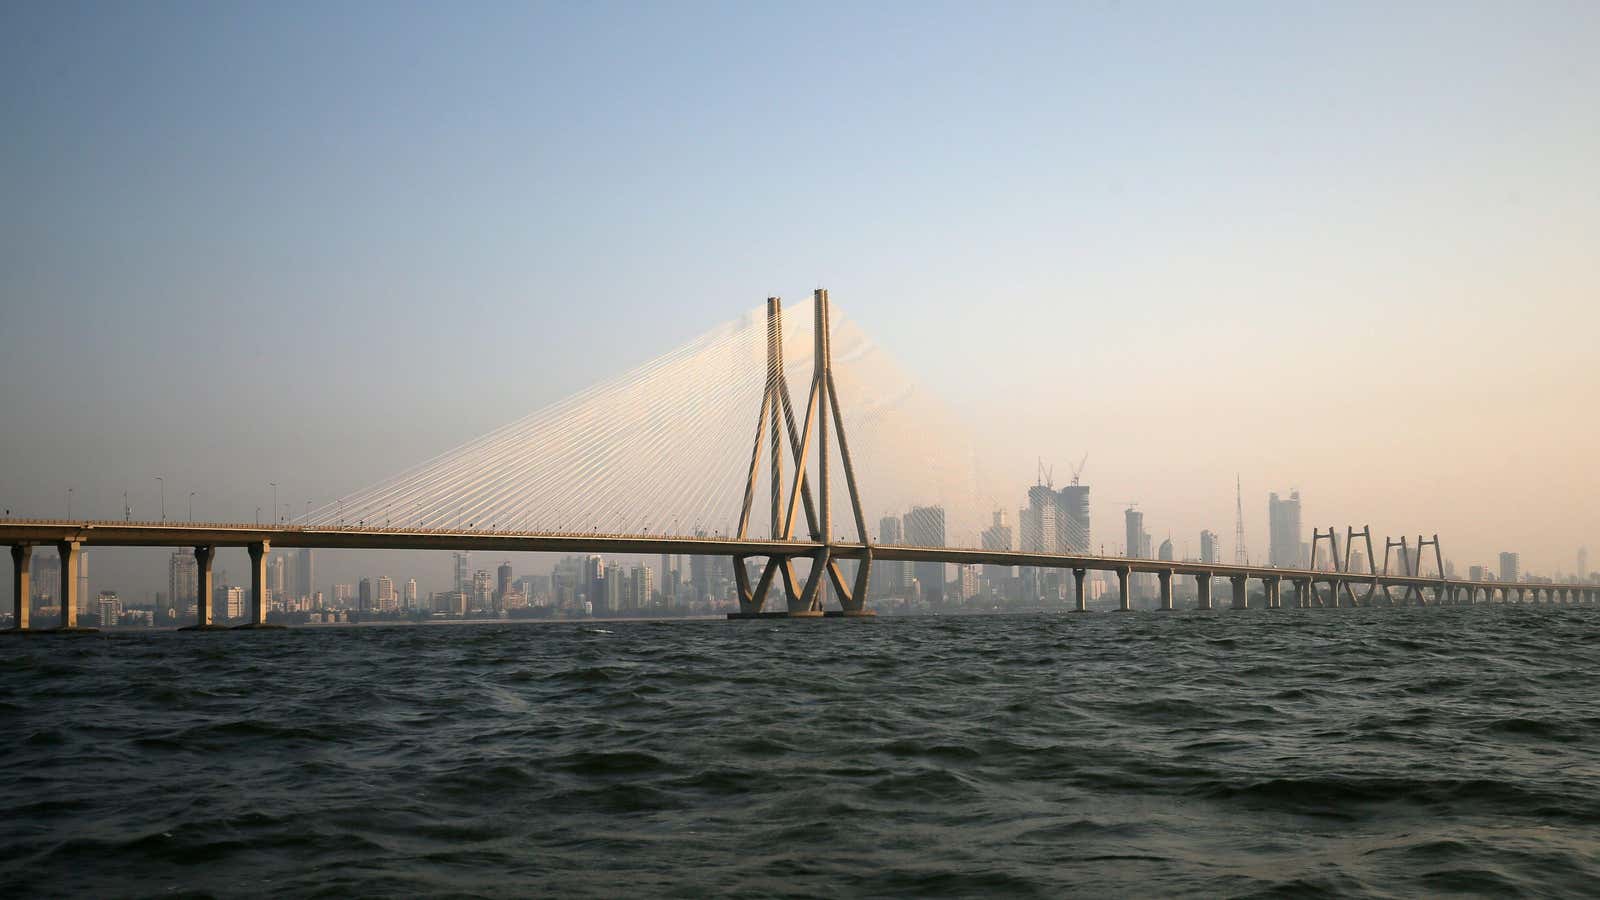 Indian cities need $840 billion in infrastructure over the next 15 years